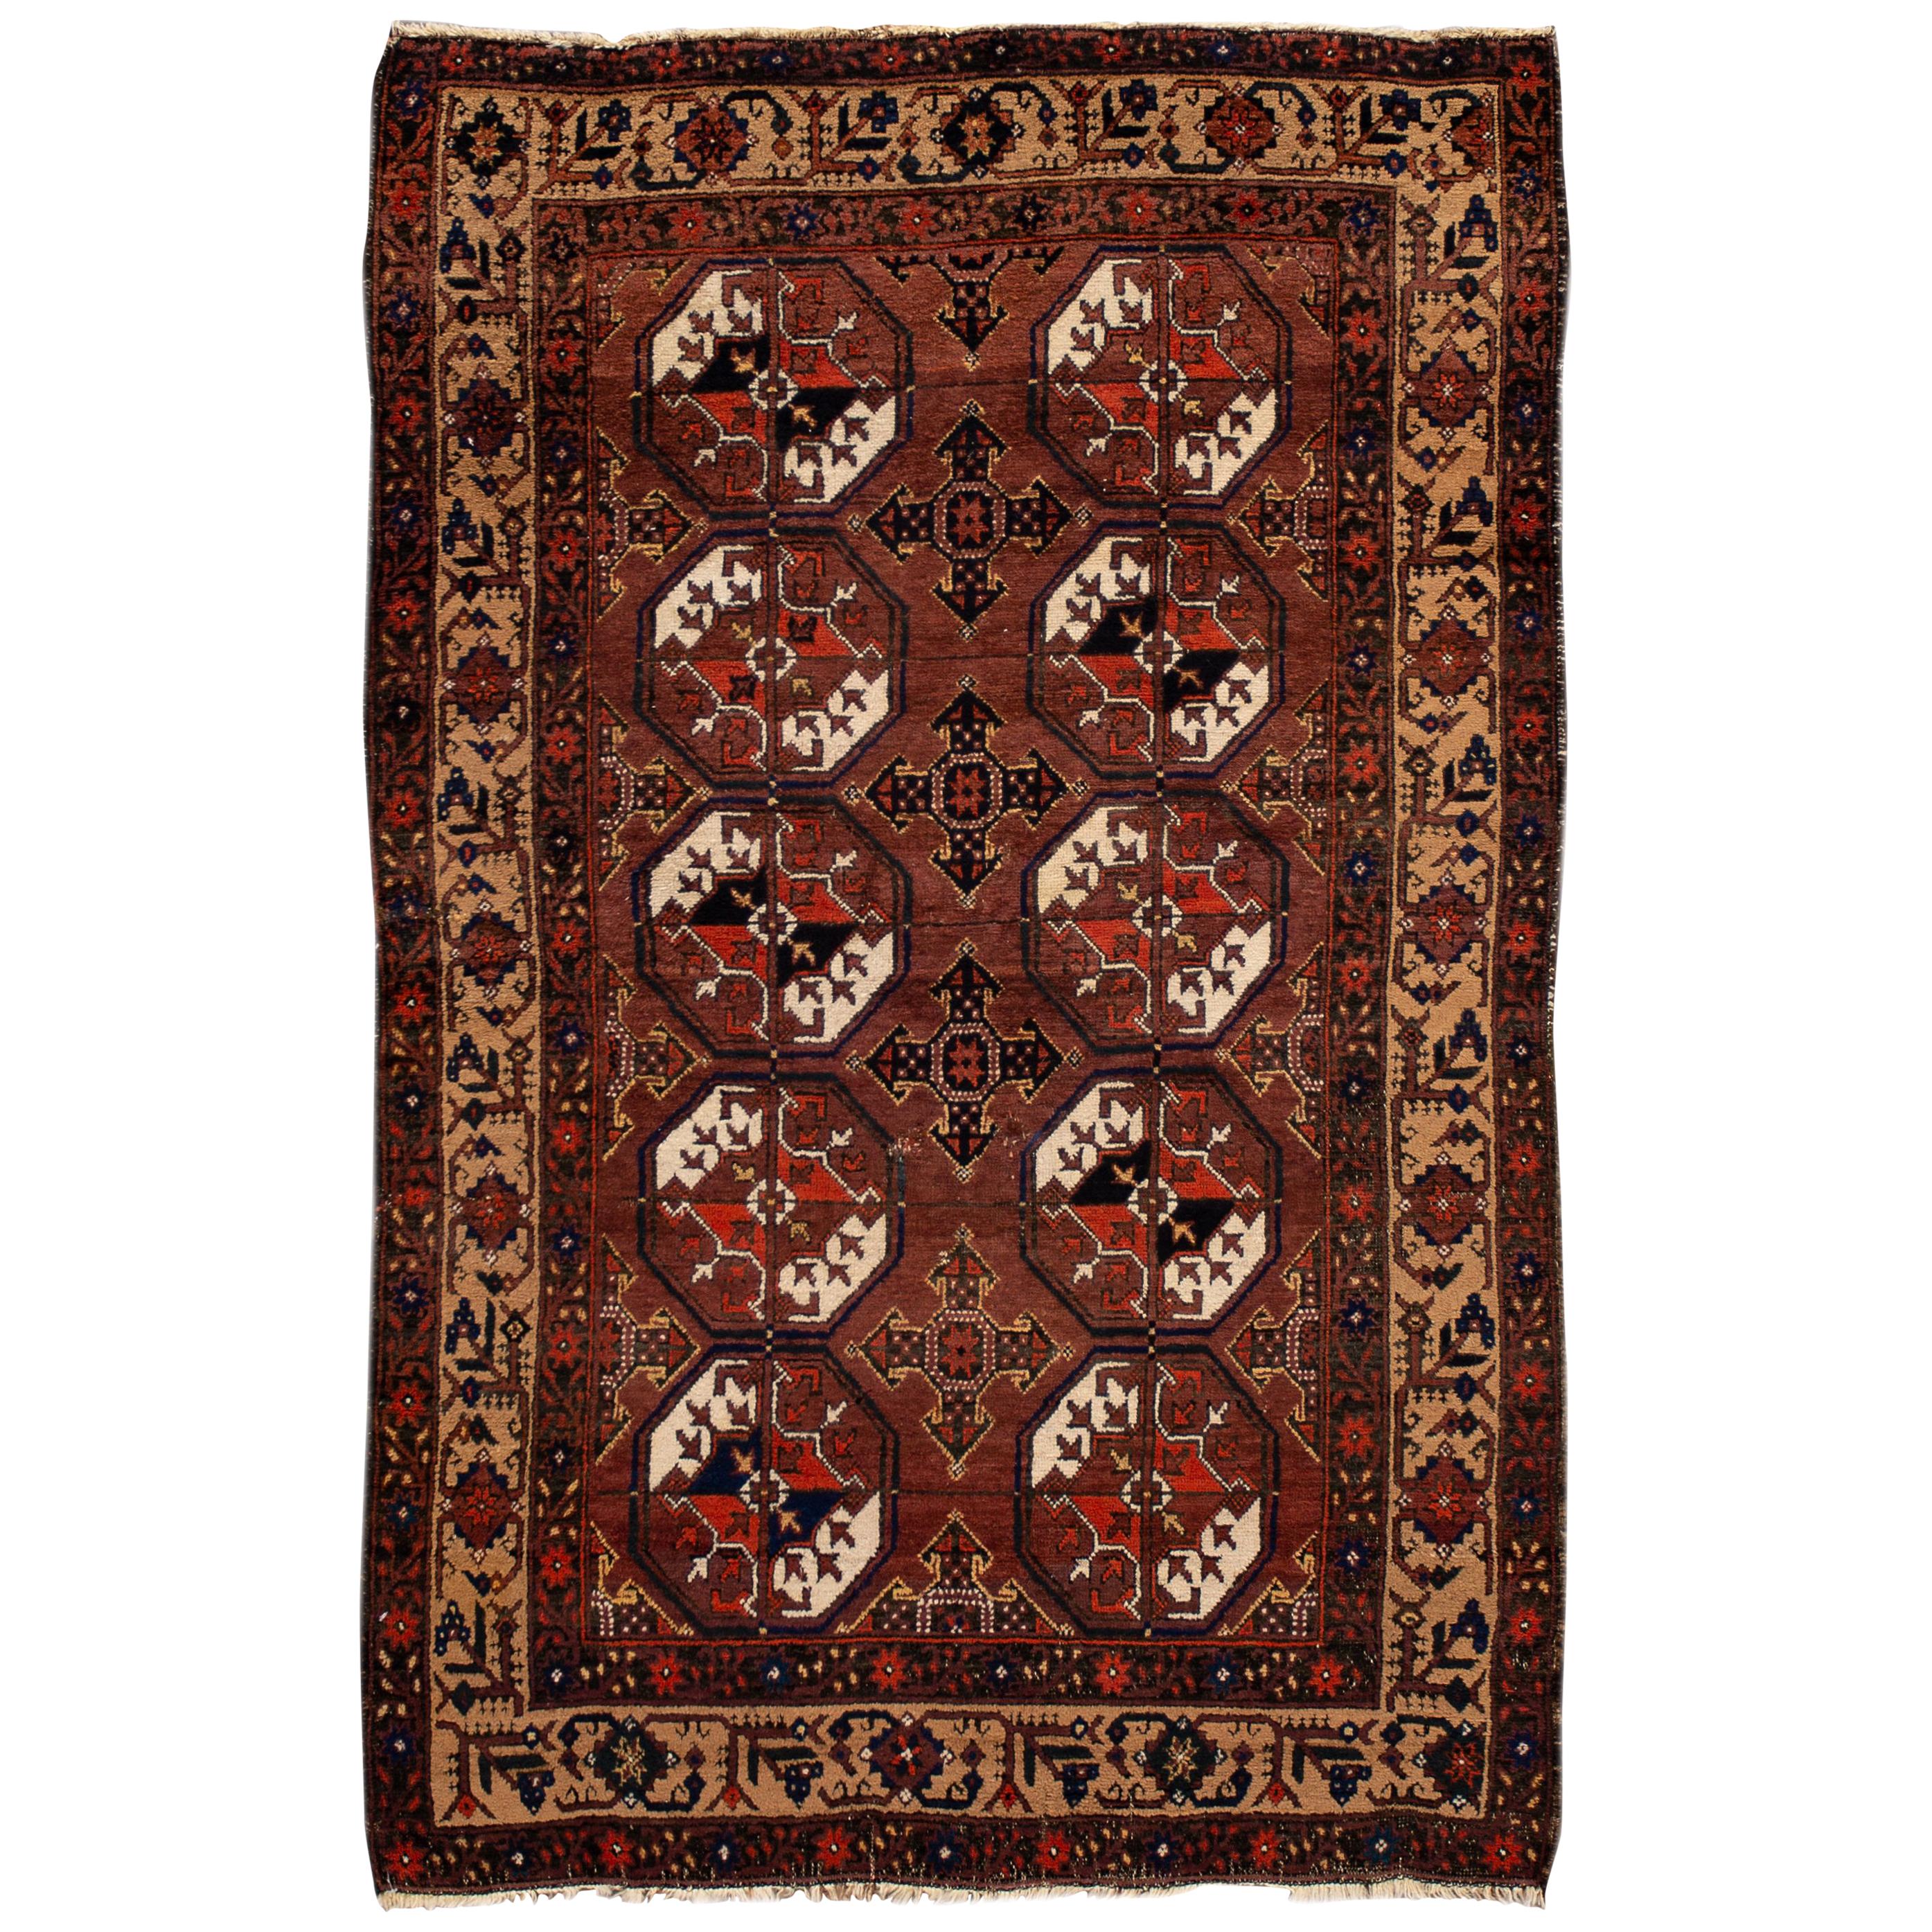 Early 20th Century Antique Turkaman Rug